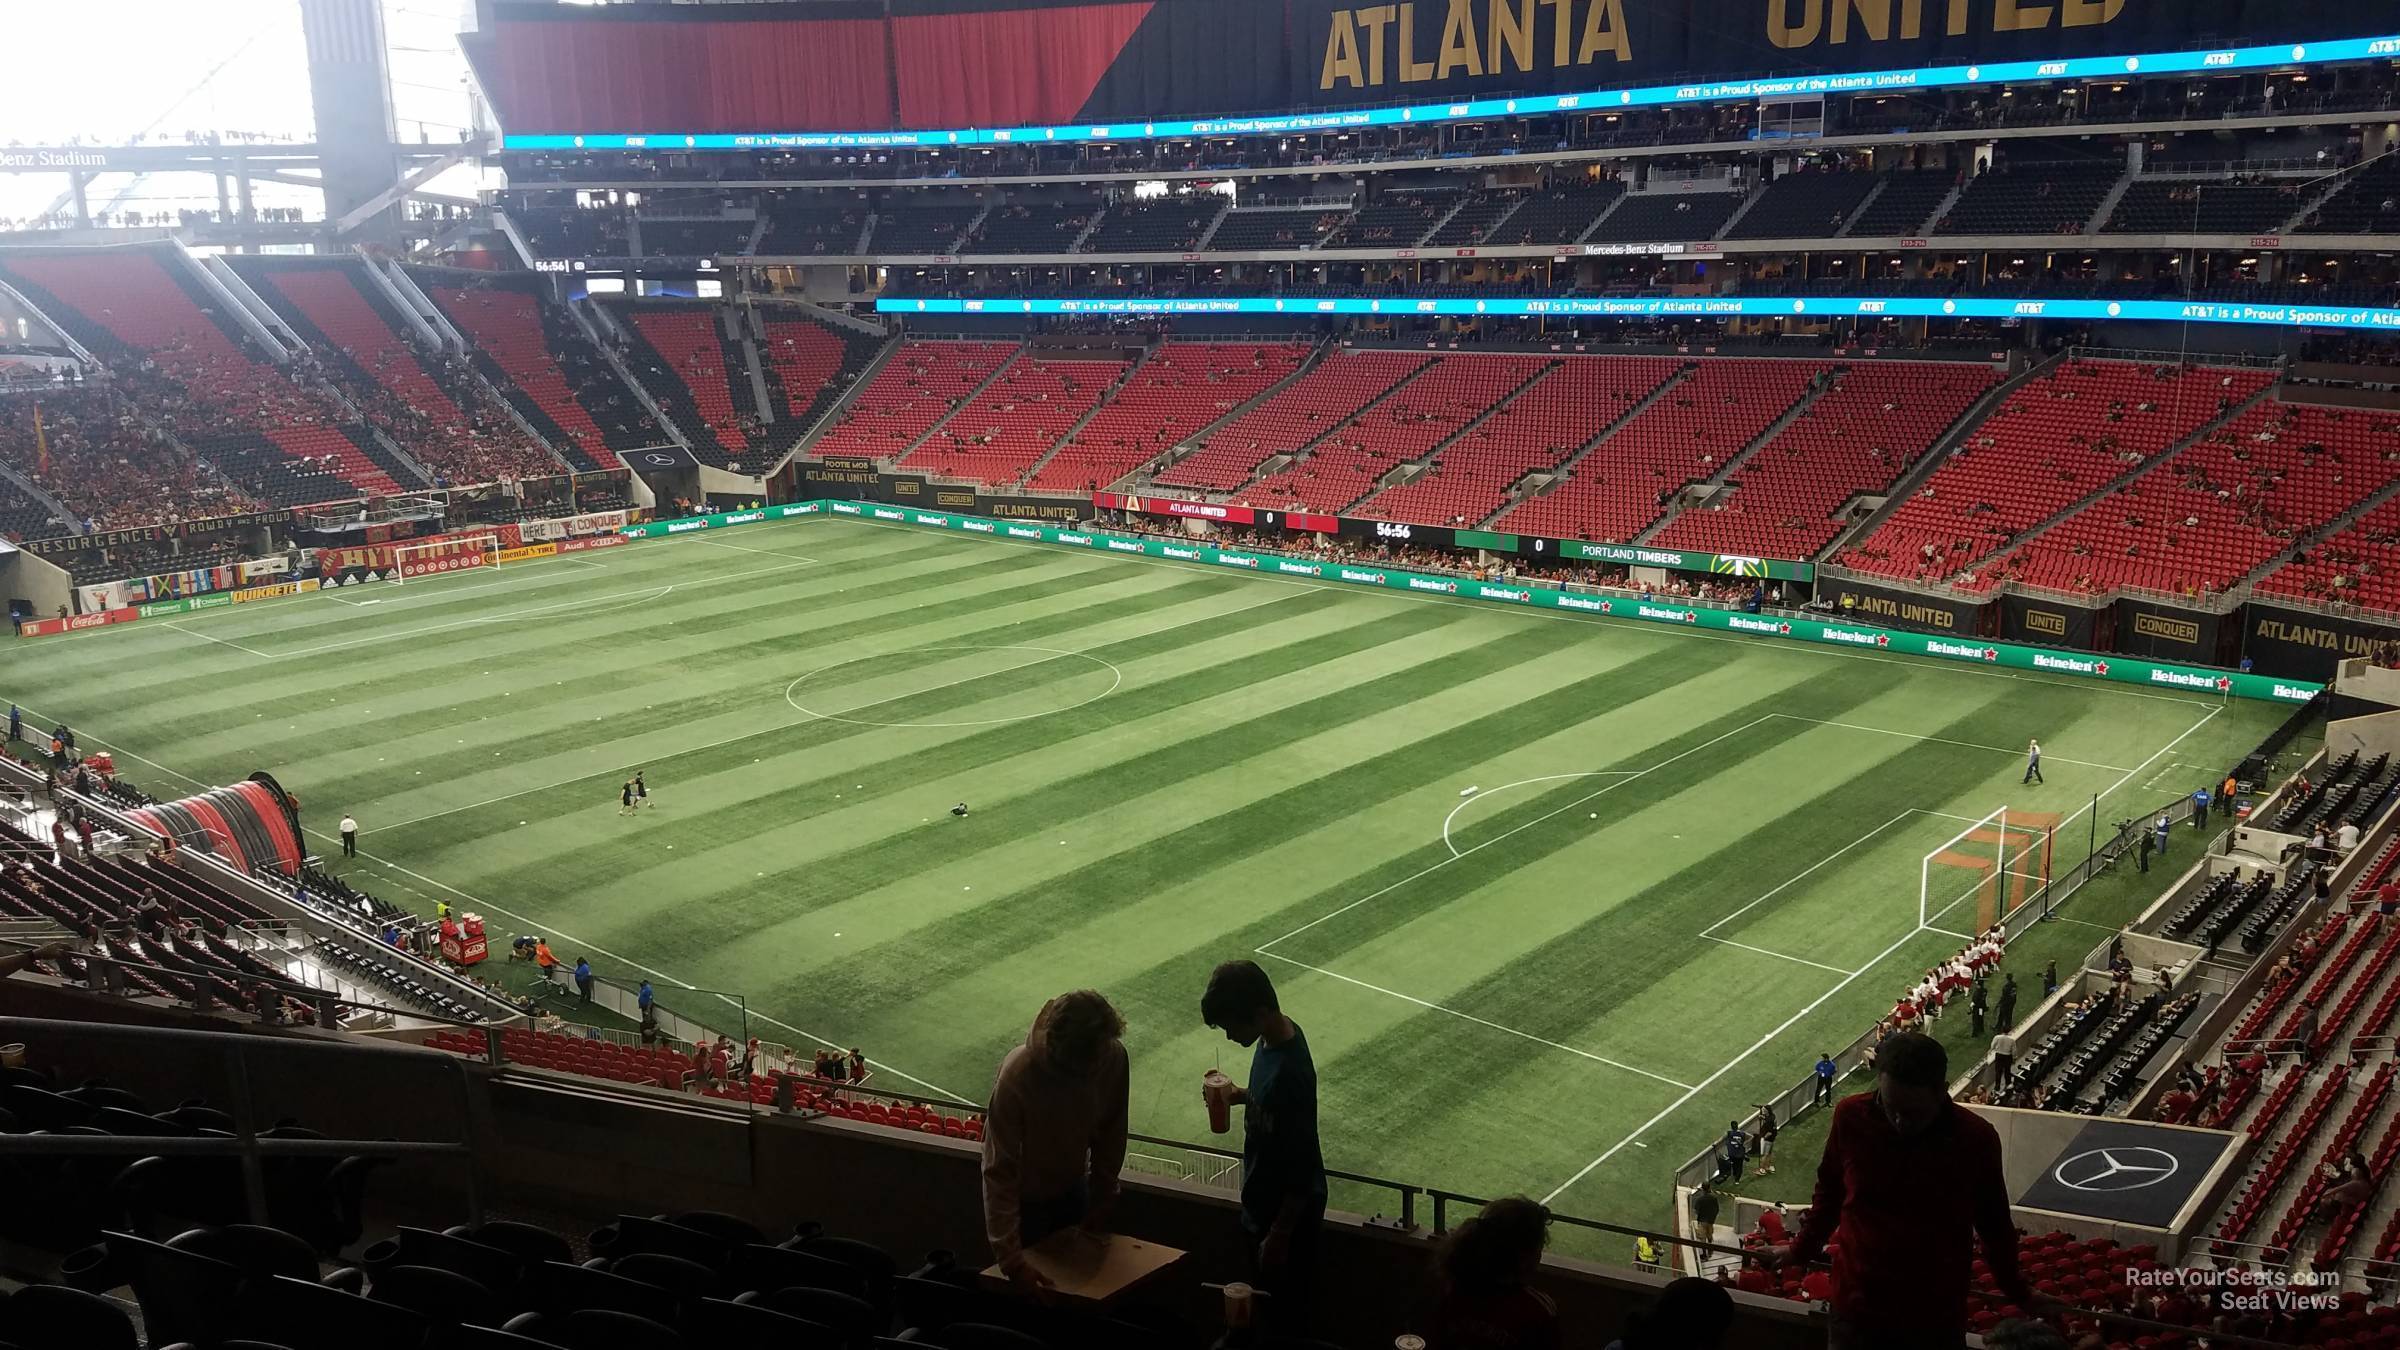 section 230, row 9 seat view  for soccer - mercedes-benz stadium